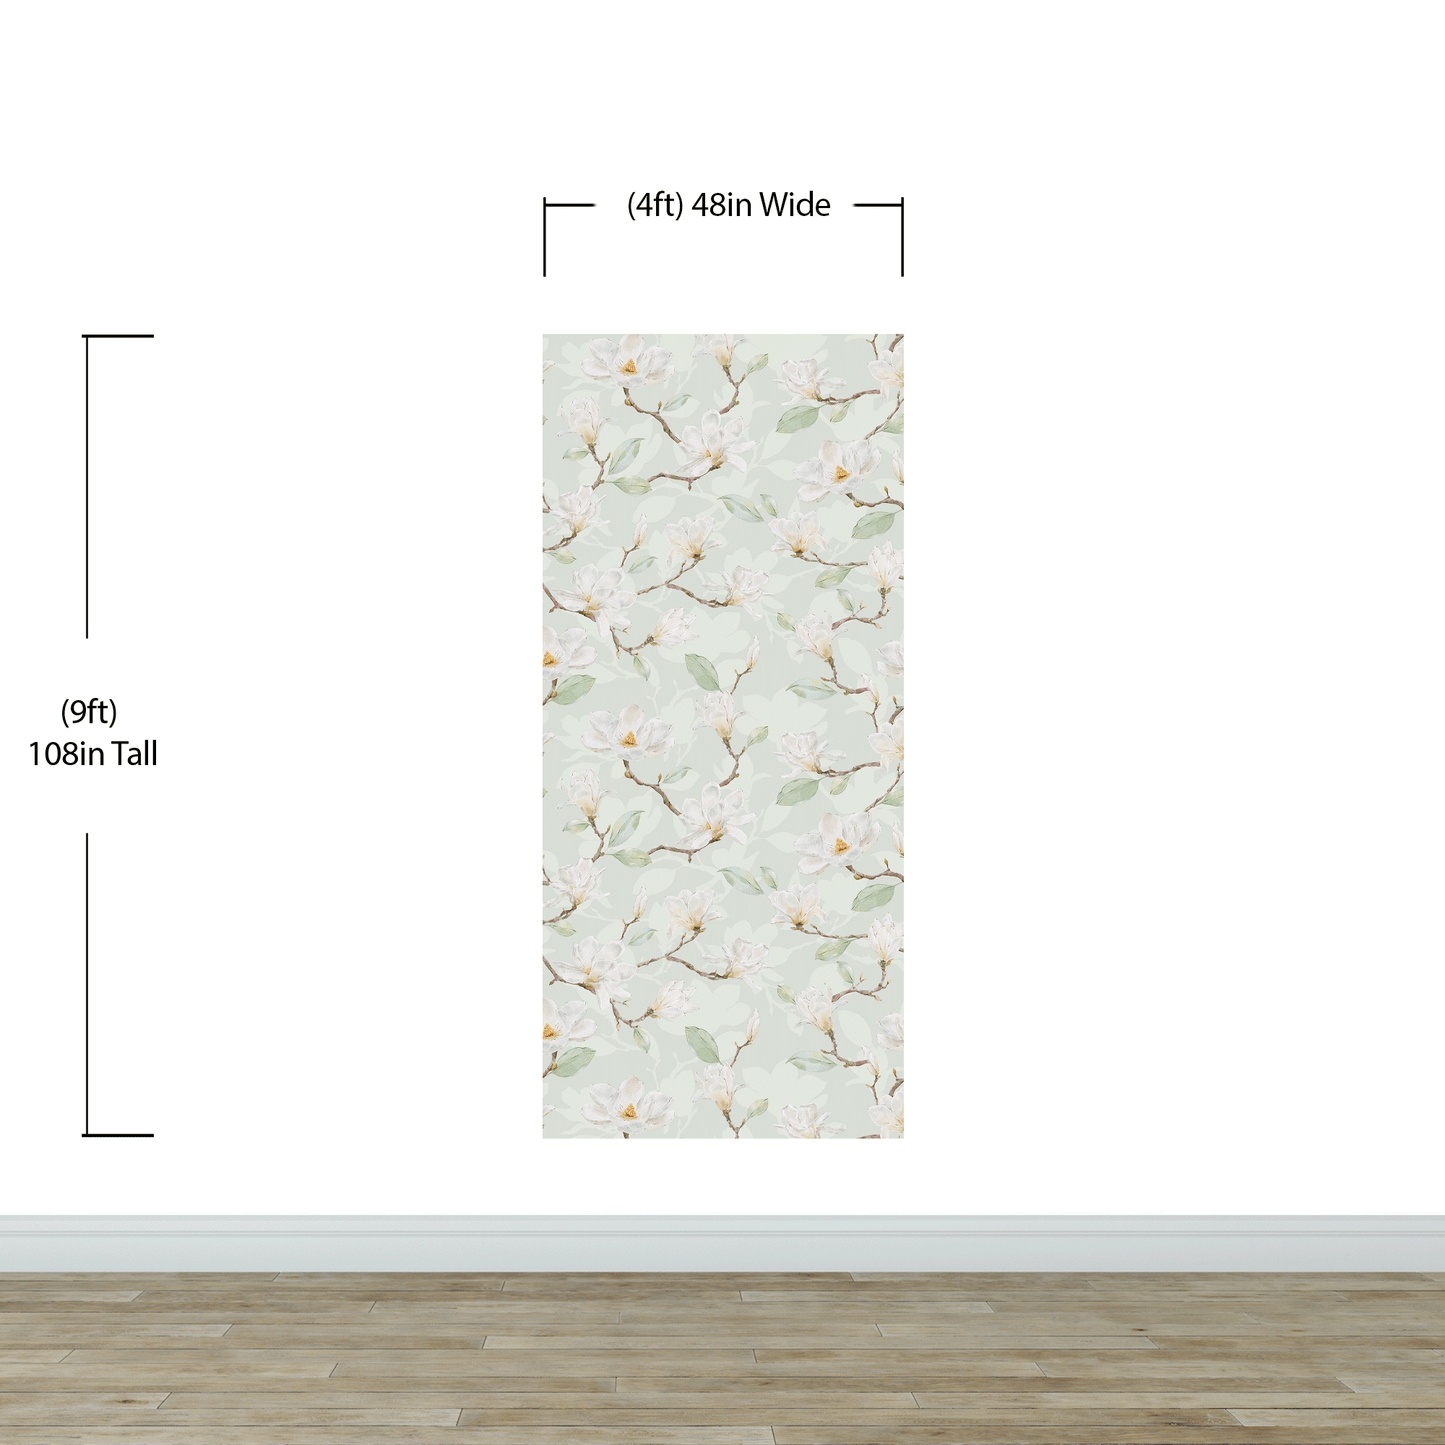 White Magnolia Wall Mural Peel and Stick Wallpaper. #6477